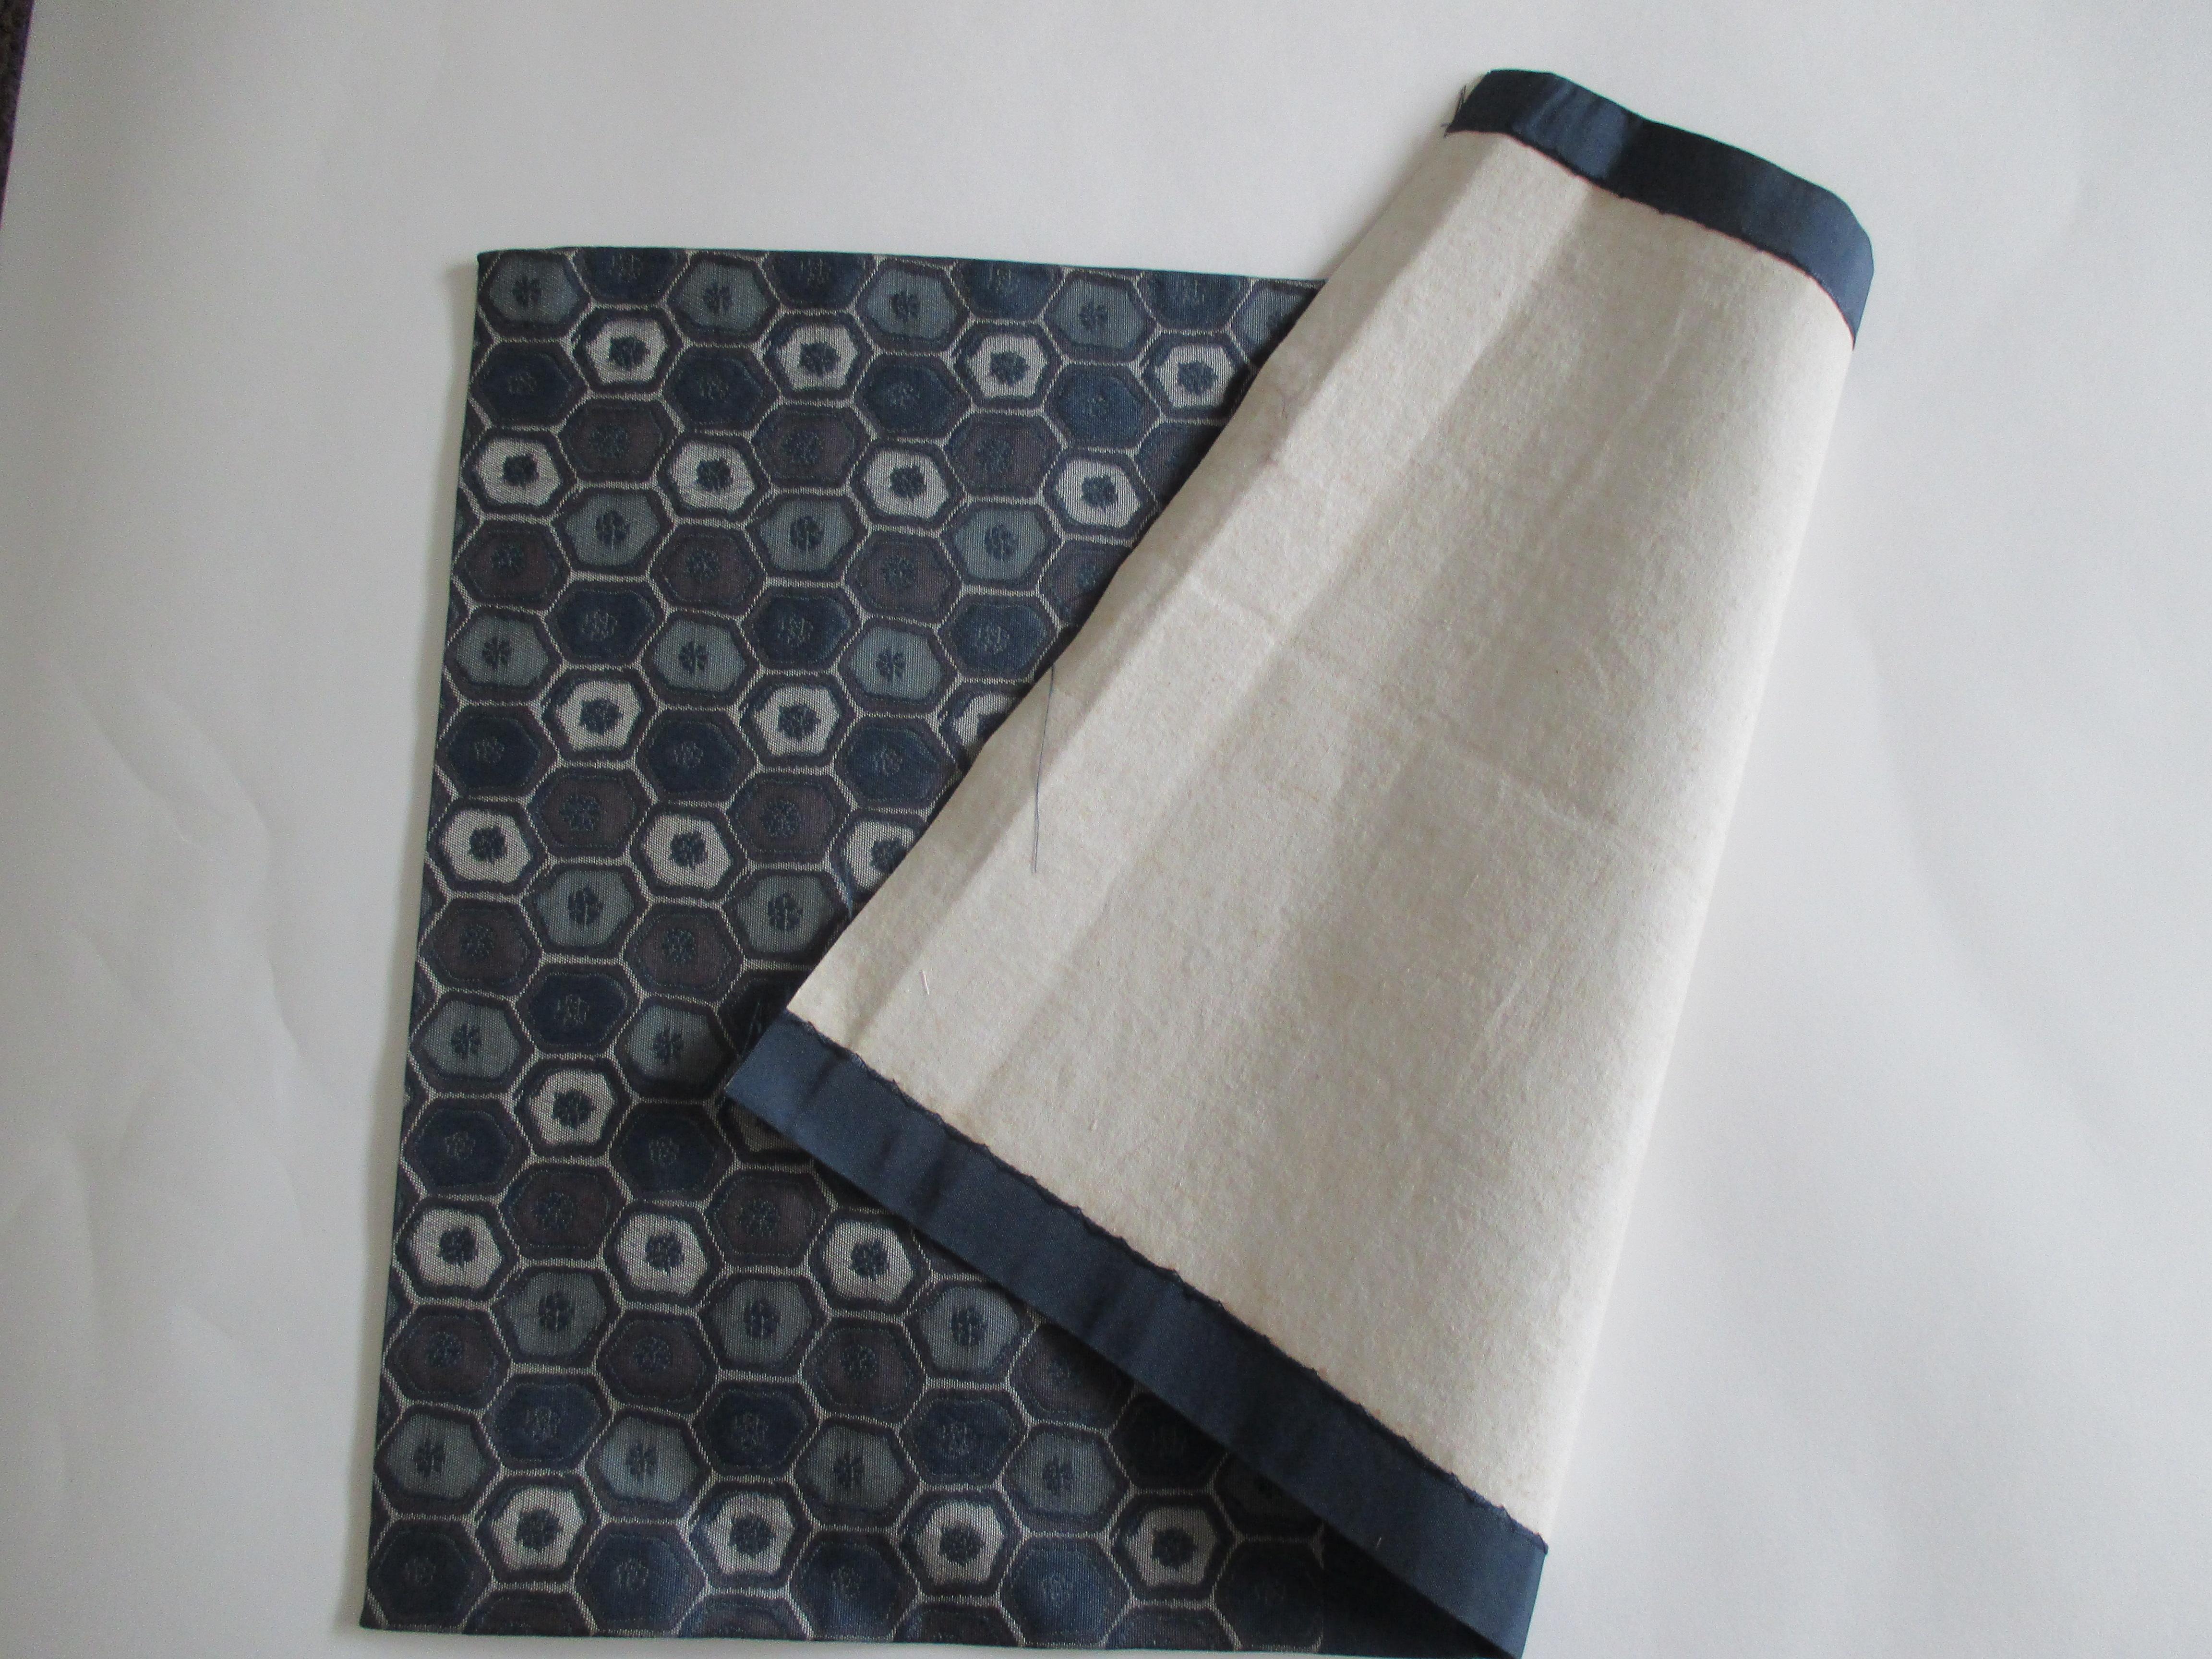 Vintage blue and grey silk Obi textile with hexagonal designs fragment.
Sold as is.
No backing.
Ideal for a petite decorative pillow.
Size: 12